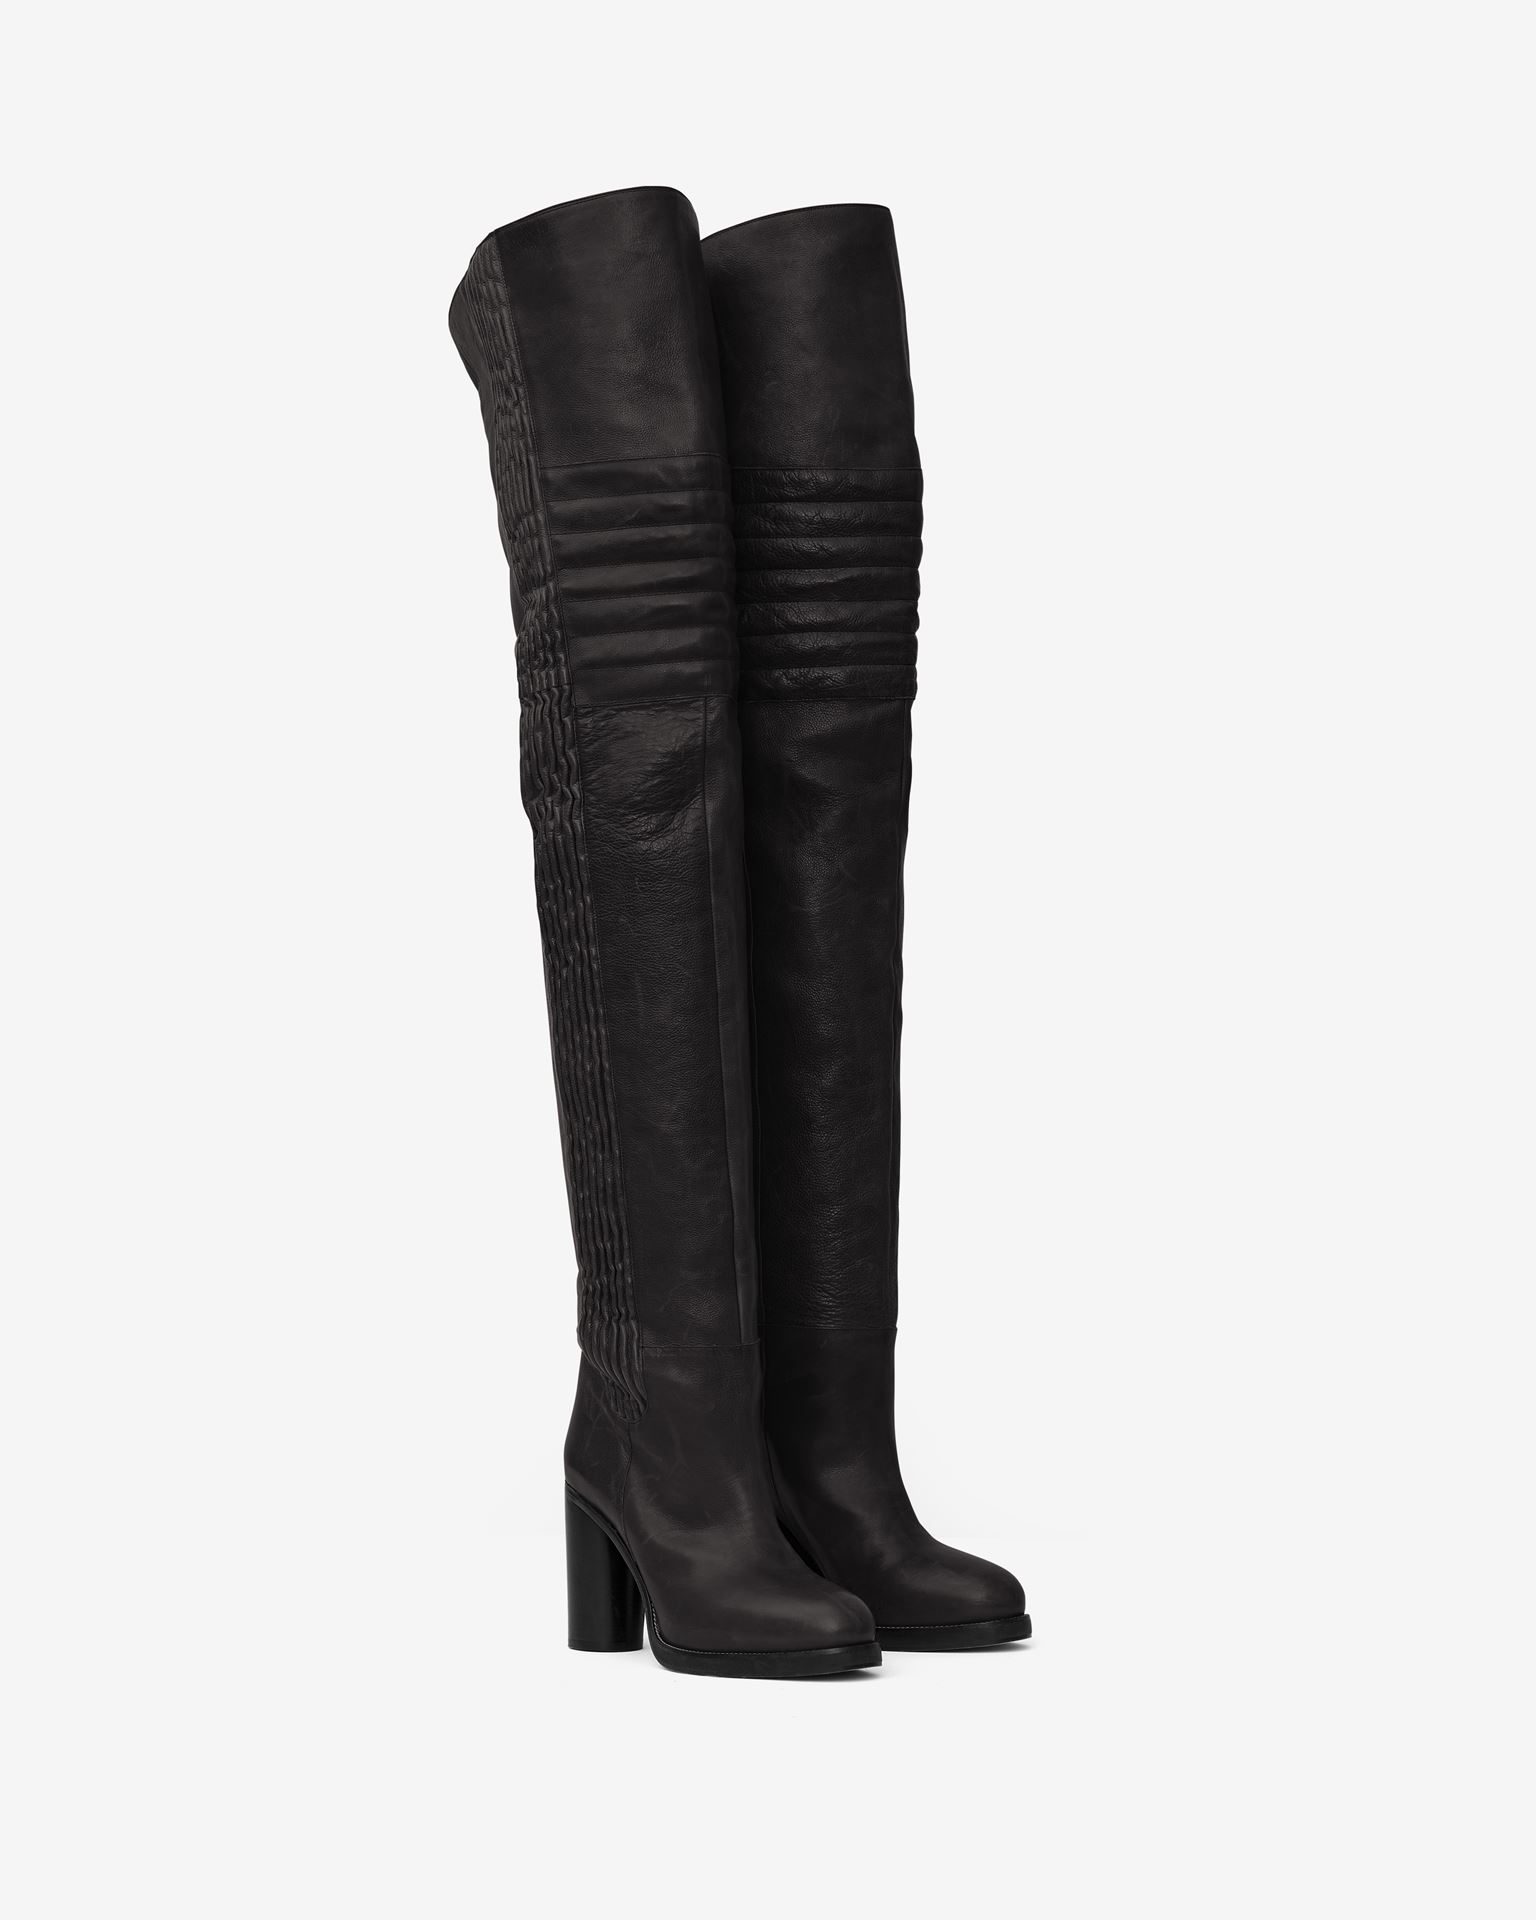 Isabel Marant, Laelle Leather Over-the-knee Boots - Women - Black